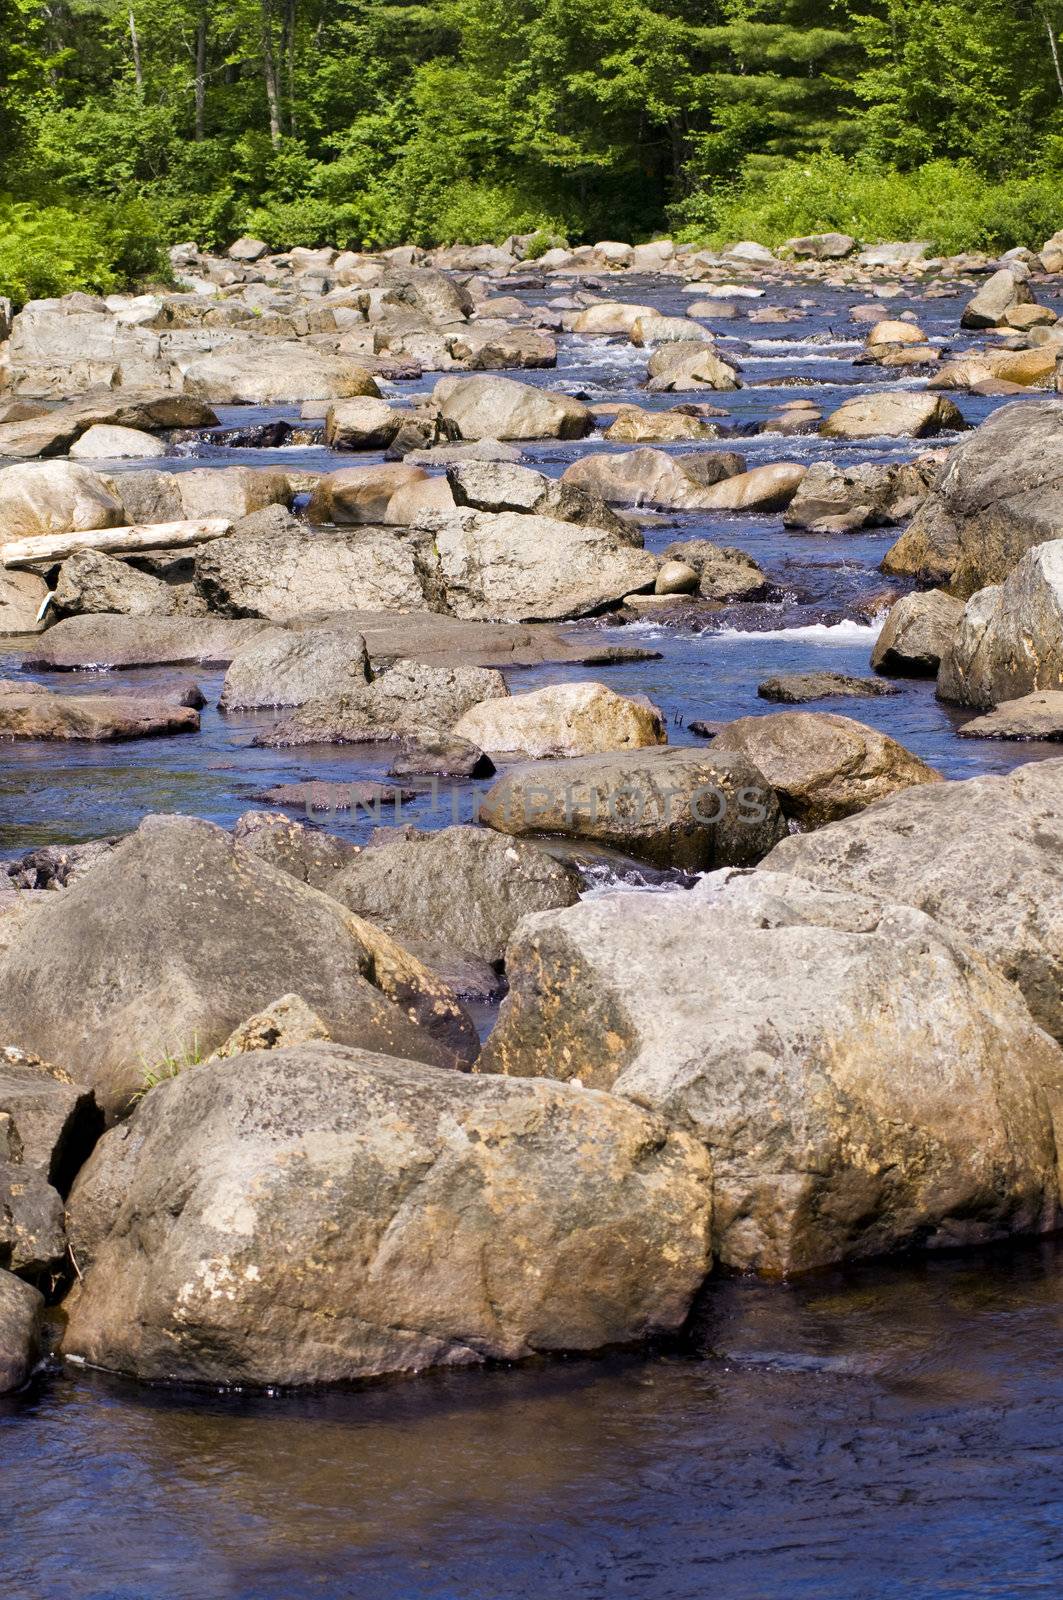 Wooded stream with many rocks and babbling water